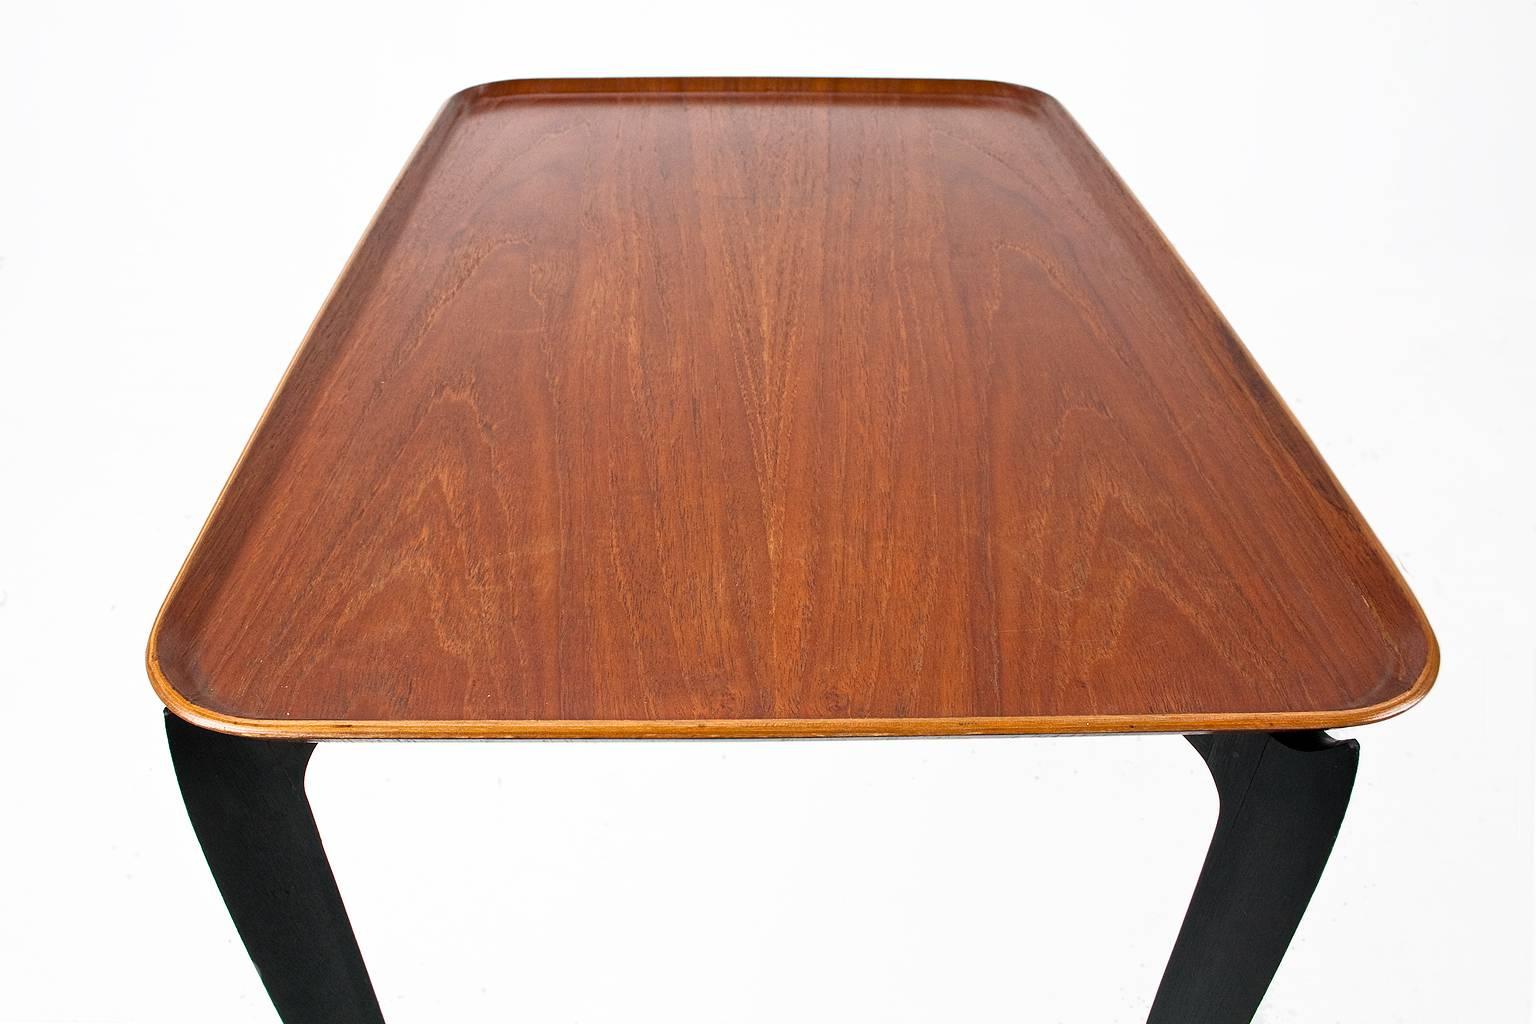 Mid-Century Modern Teak Side Table by Willumsen and Engholm for Fritz Hansen, 1950s, Danish Design